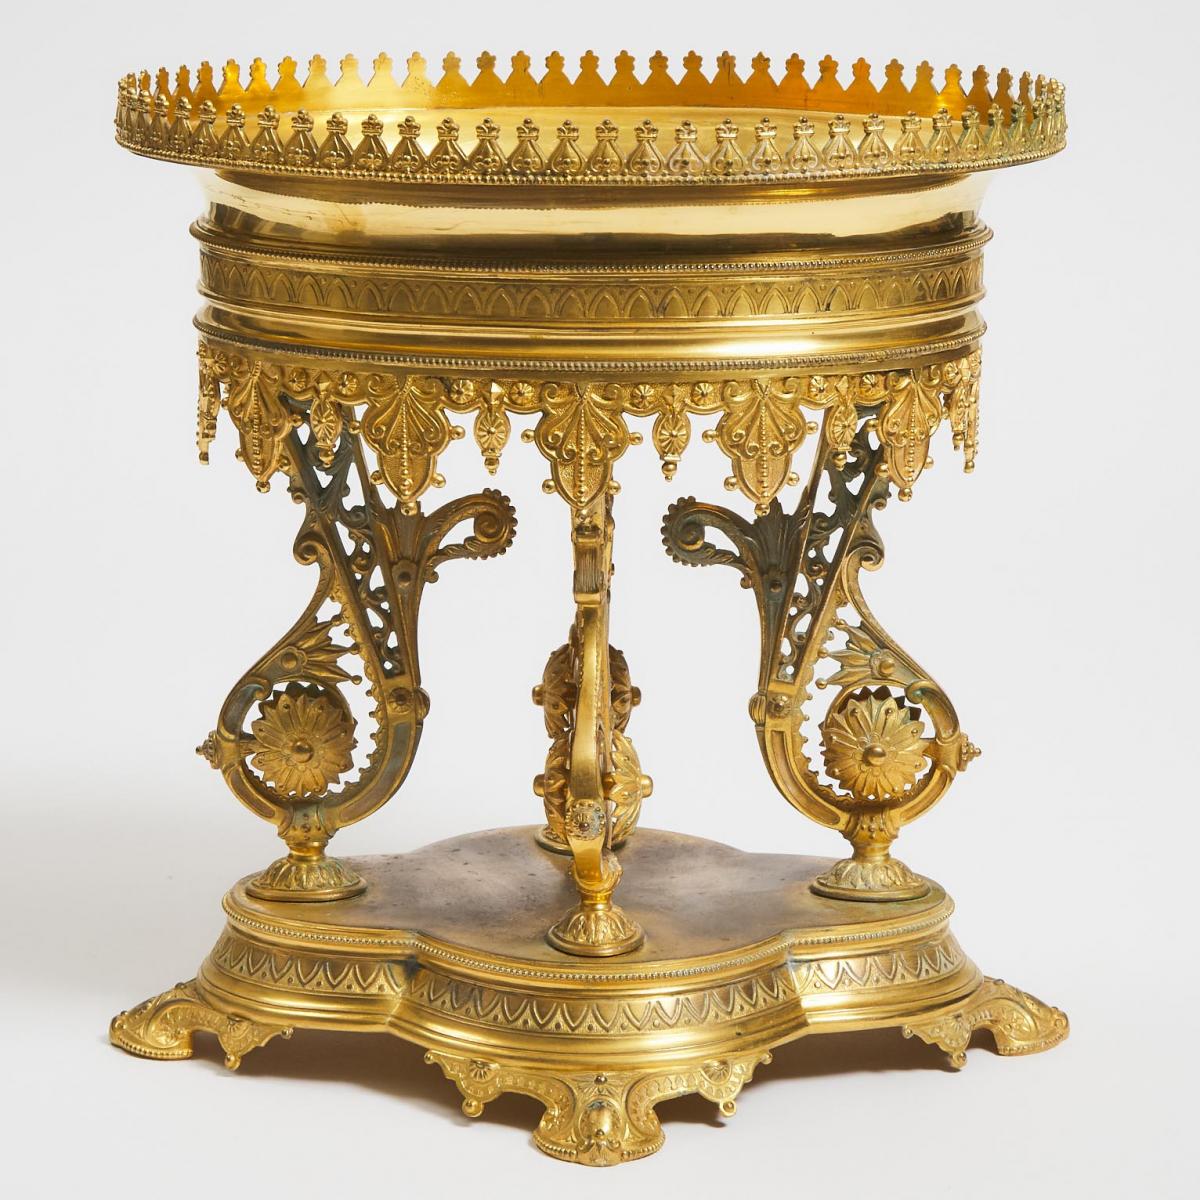 English Aesthetic Movement Gilt Bronze Oval Centrepiece Stand, c.1870, 13.25 x 12.5 x 9 in — 33.7 x